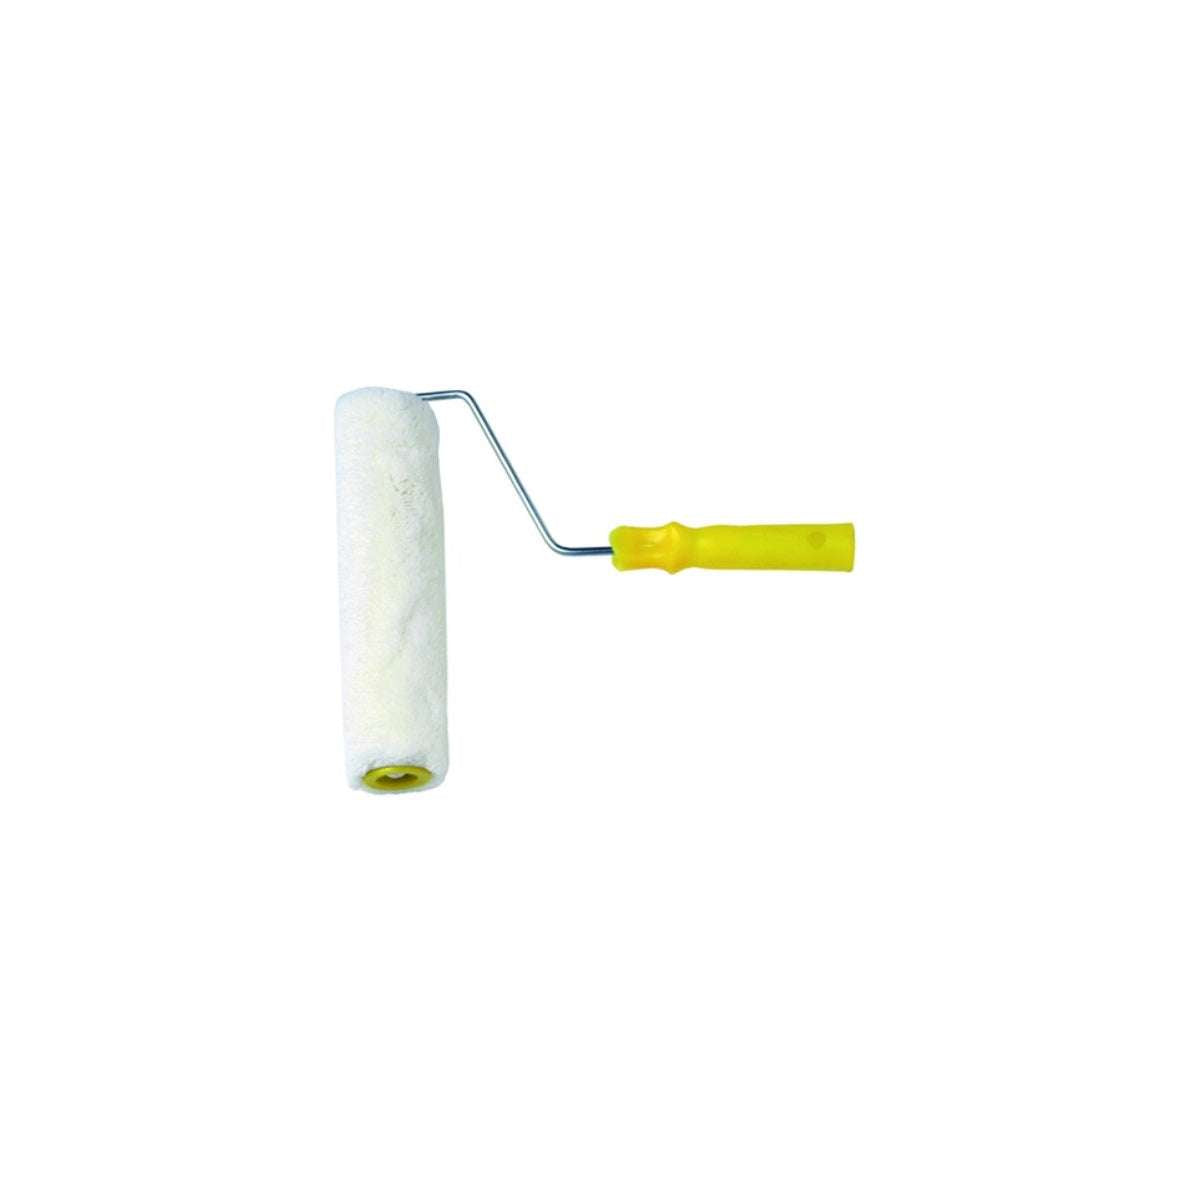 Synthetic wool acrylic water paint roller 200mm - Maurer